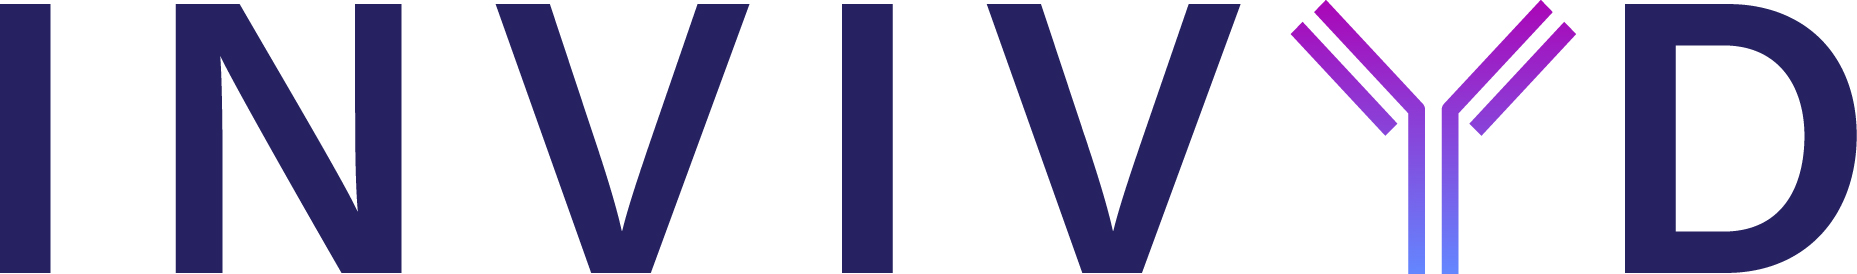 Invivyd Announces General Alignment with FDA on Pathway to Potential EUA for VYD222 and Anticipated Follow-On Monoclonal Antibody Candidates Designed to Prevent COVID-19